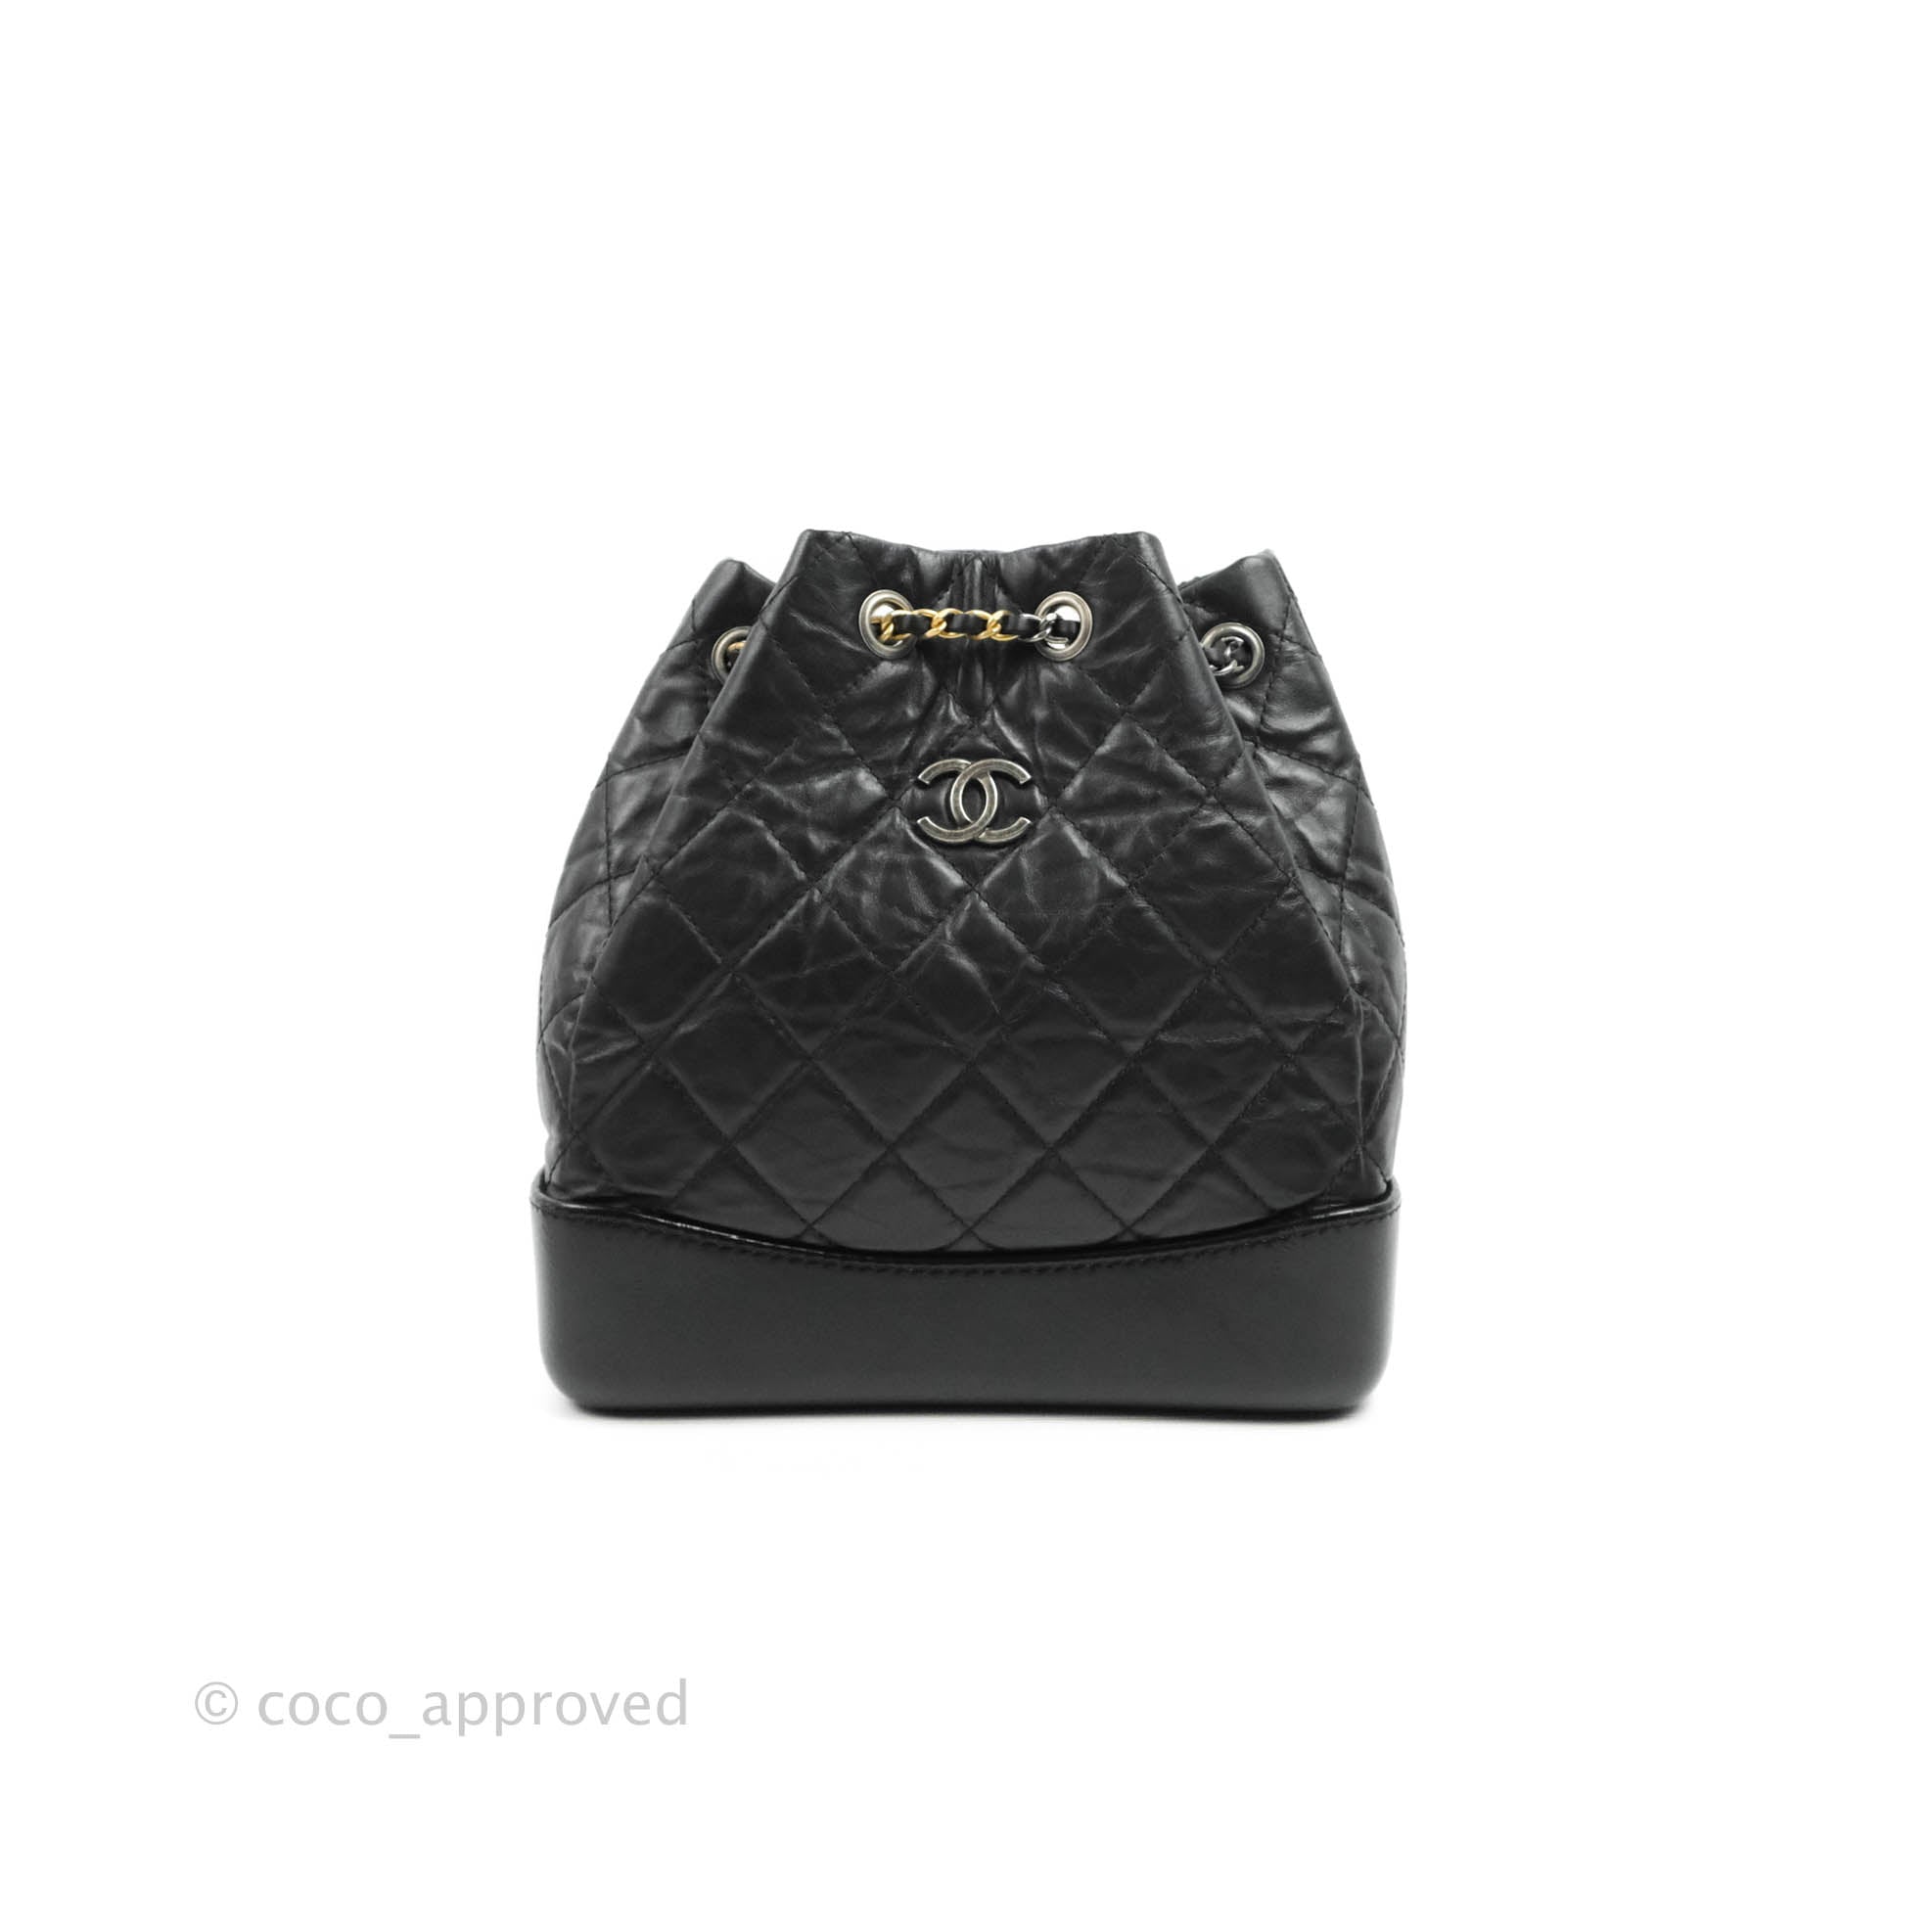 Pristine Chanel Black Small Gabrielle Backpack Bag – Boutique Patina